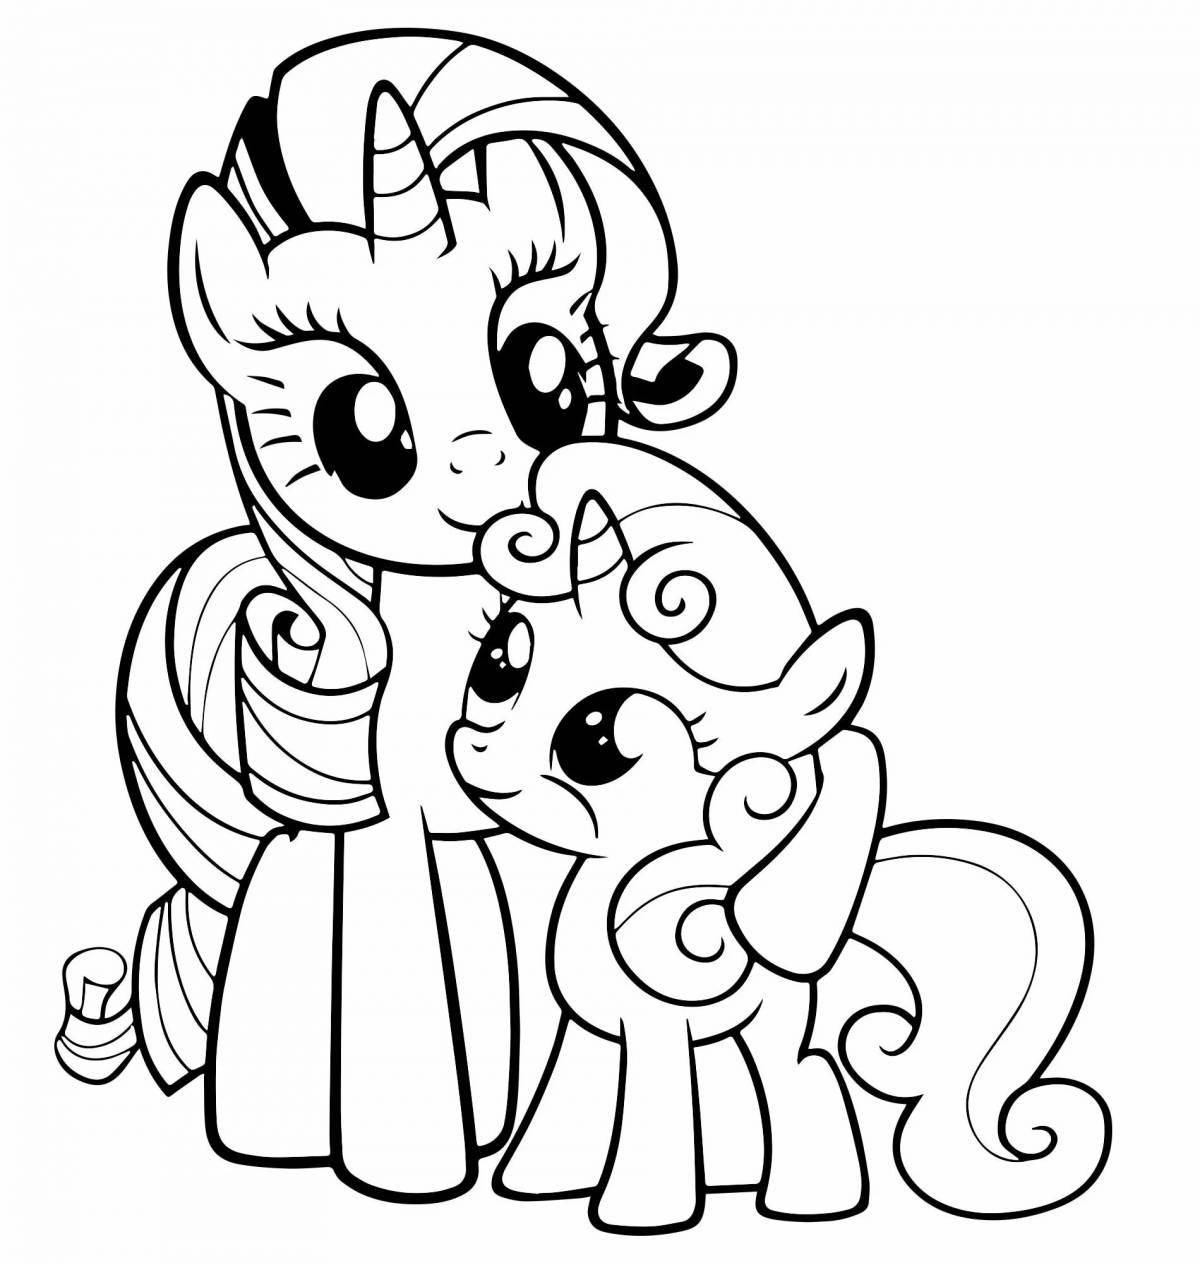 Colorful pony coloring page for 4-5 year olds